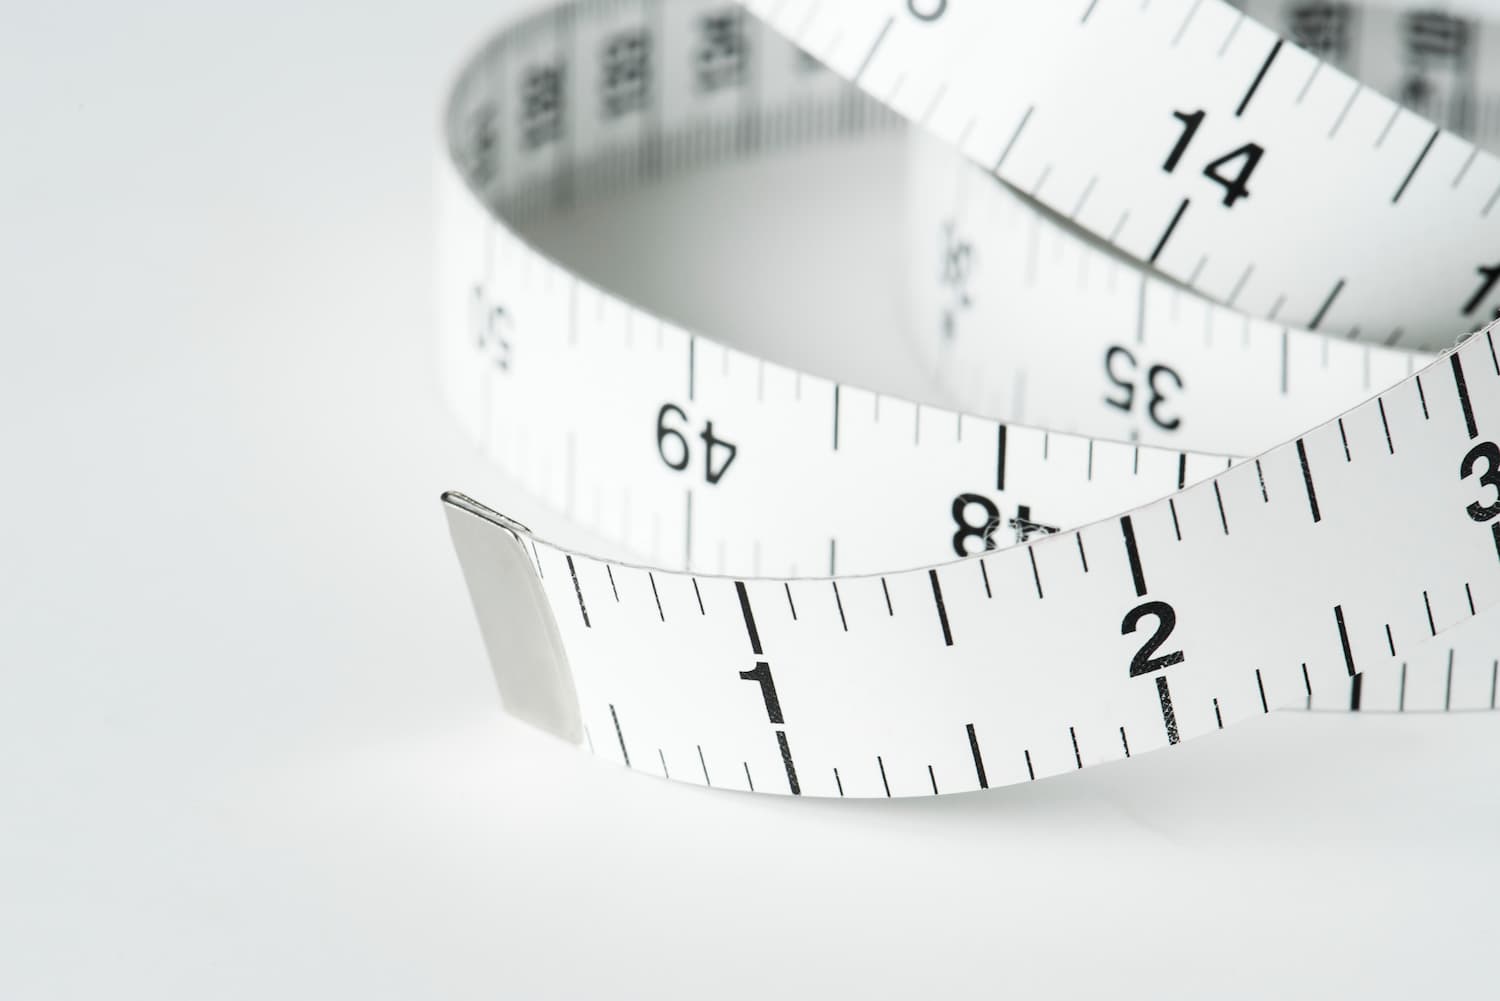 The paradox of measurement